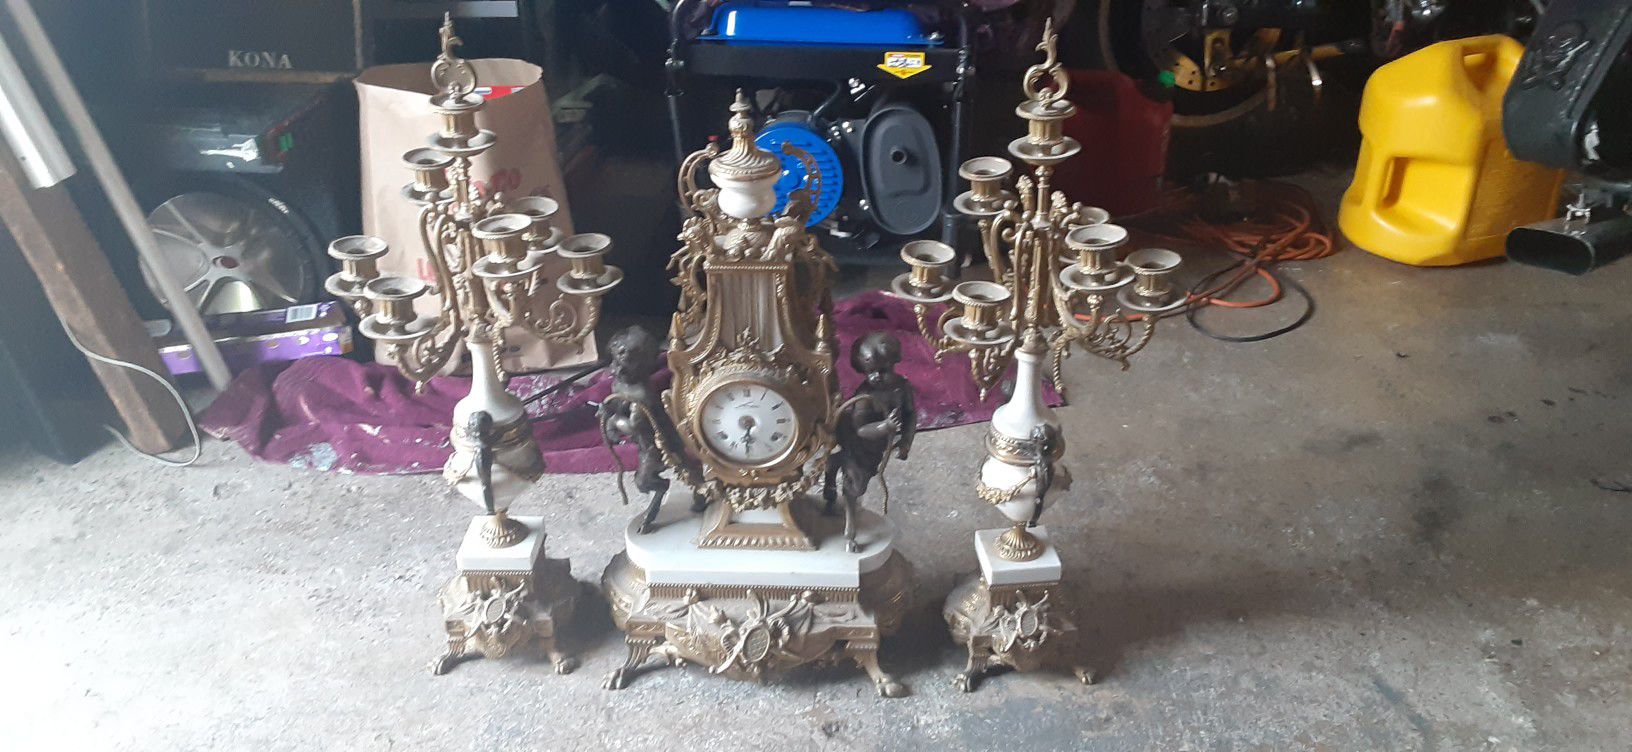 3 piece antique clock and candle holder set.